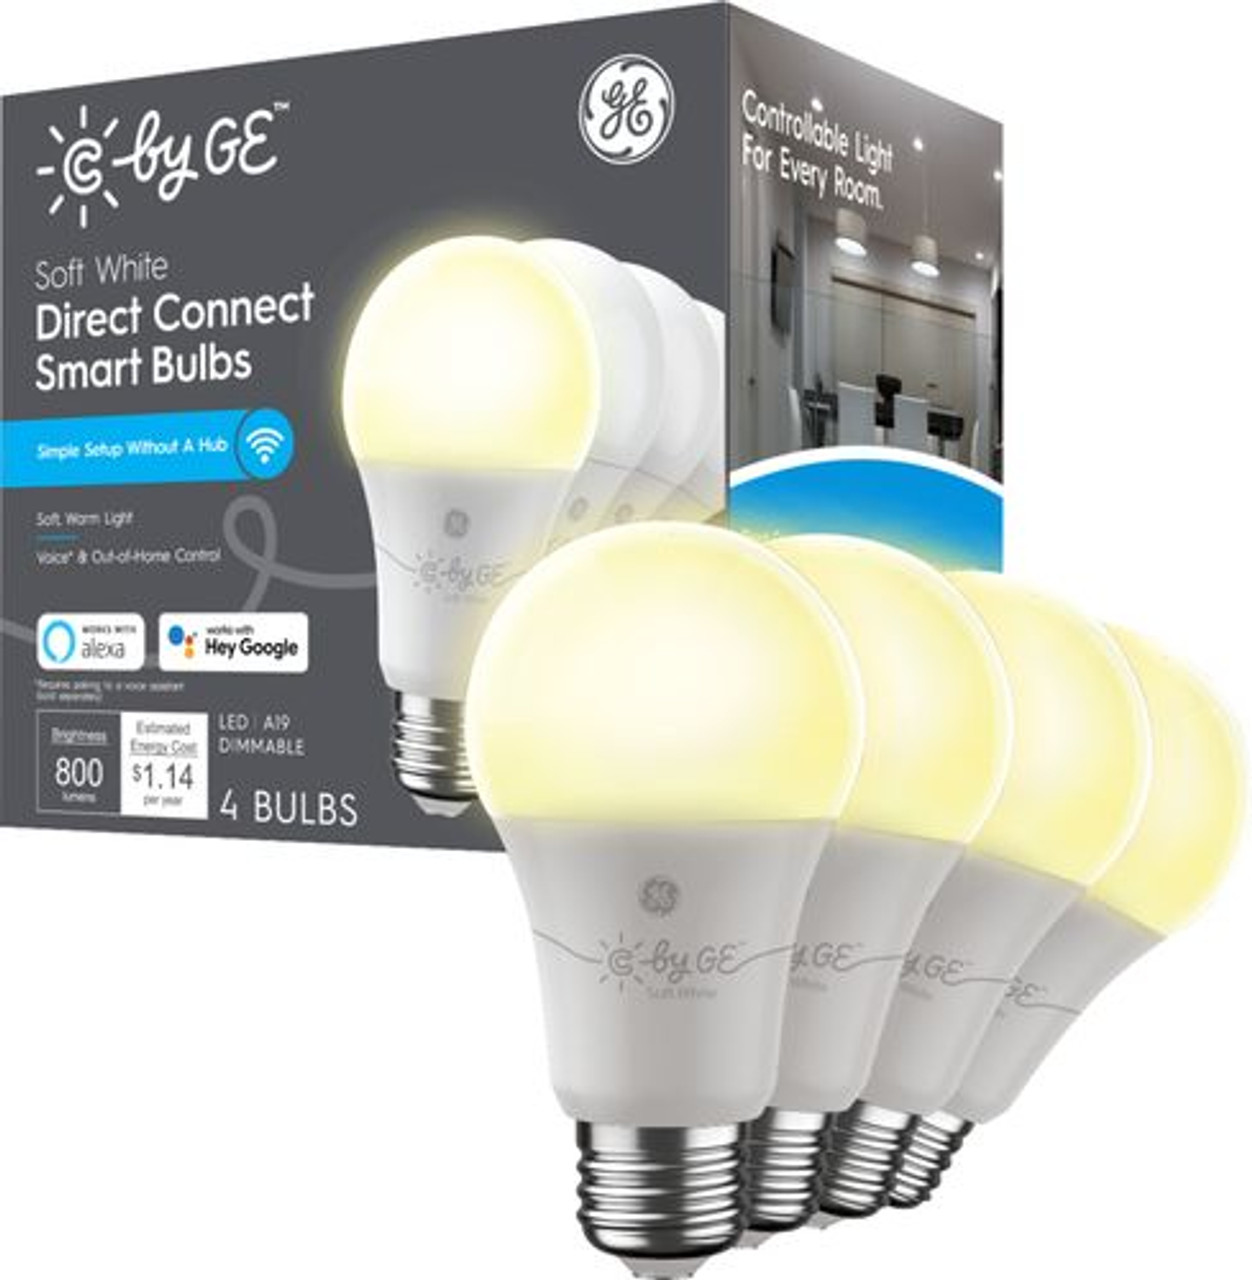 C by GE Soft White Direct Connect Light Bulbs (4 A19 Smart LED Light Bulbs), 60W Replacement - White